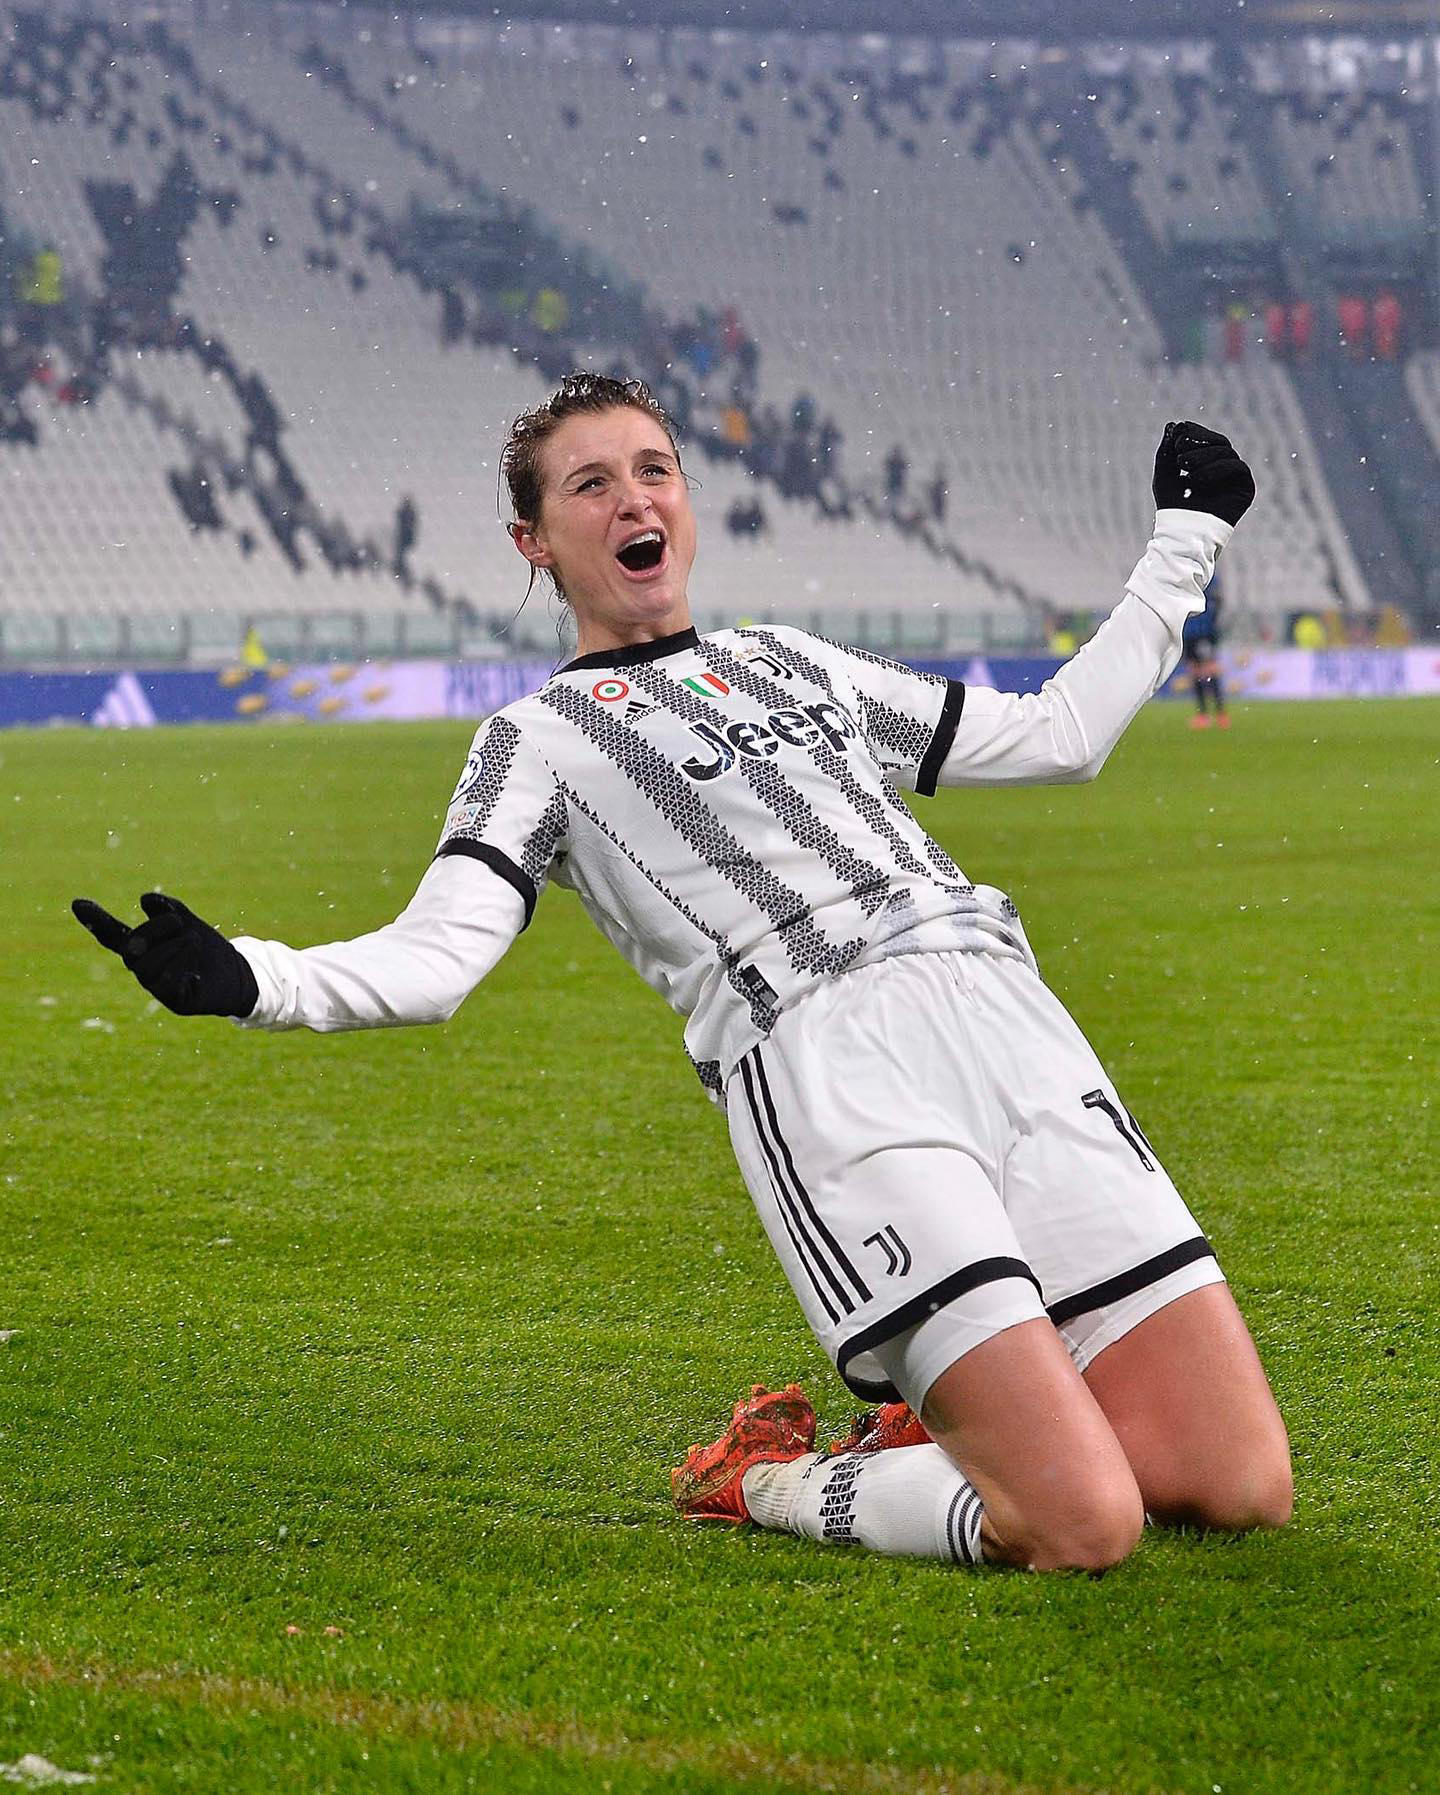 Juventus - A snowstorm of goals last night in the #UWCL